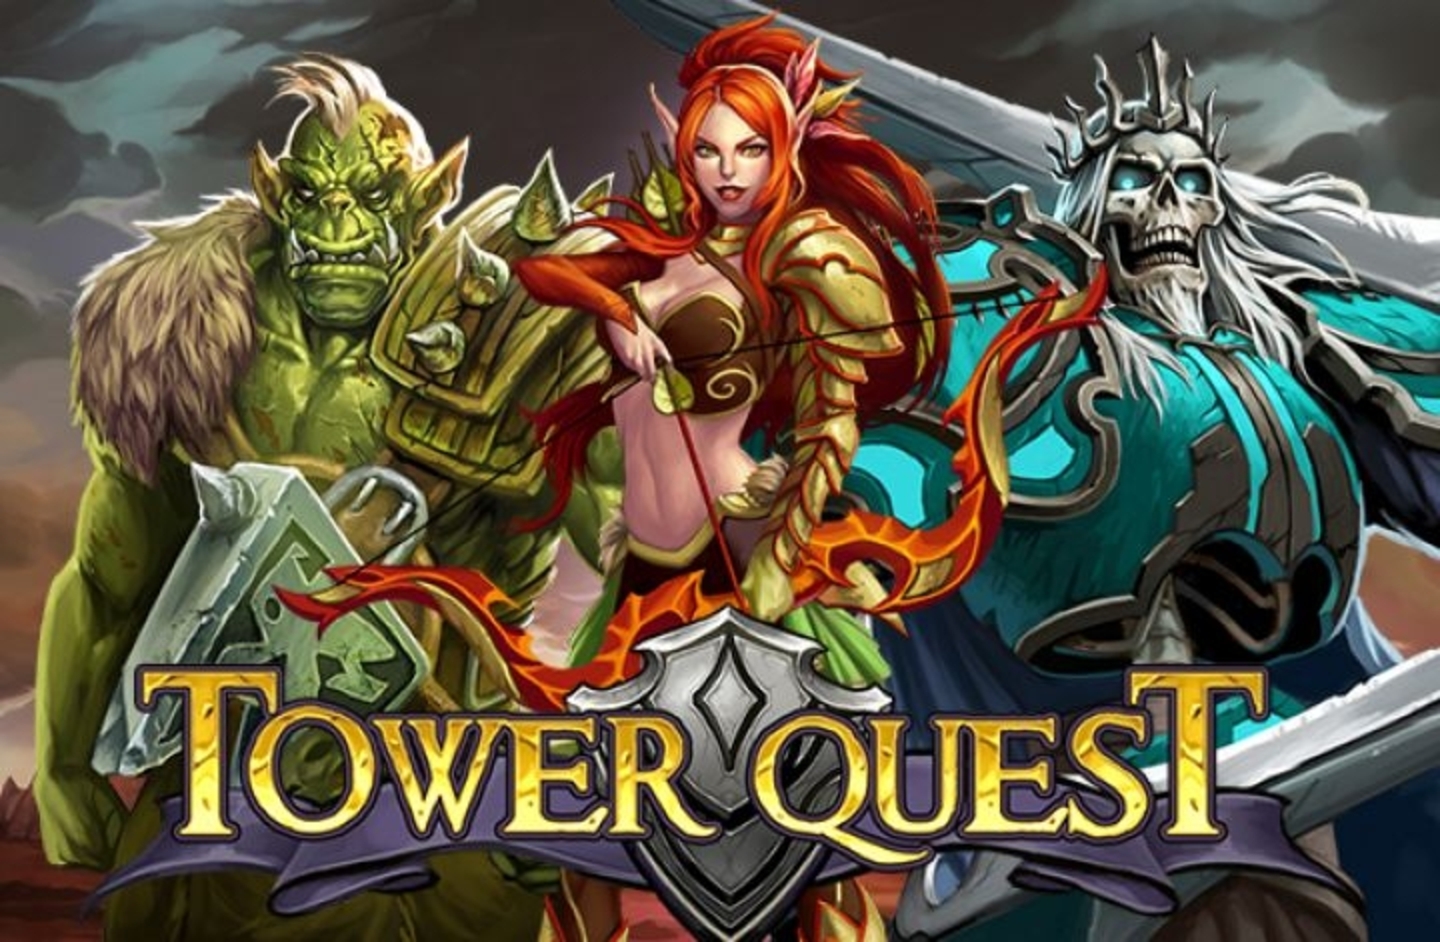 Tower Quest demo